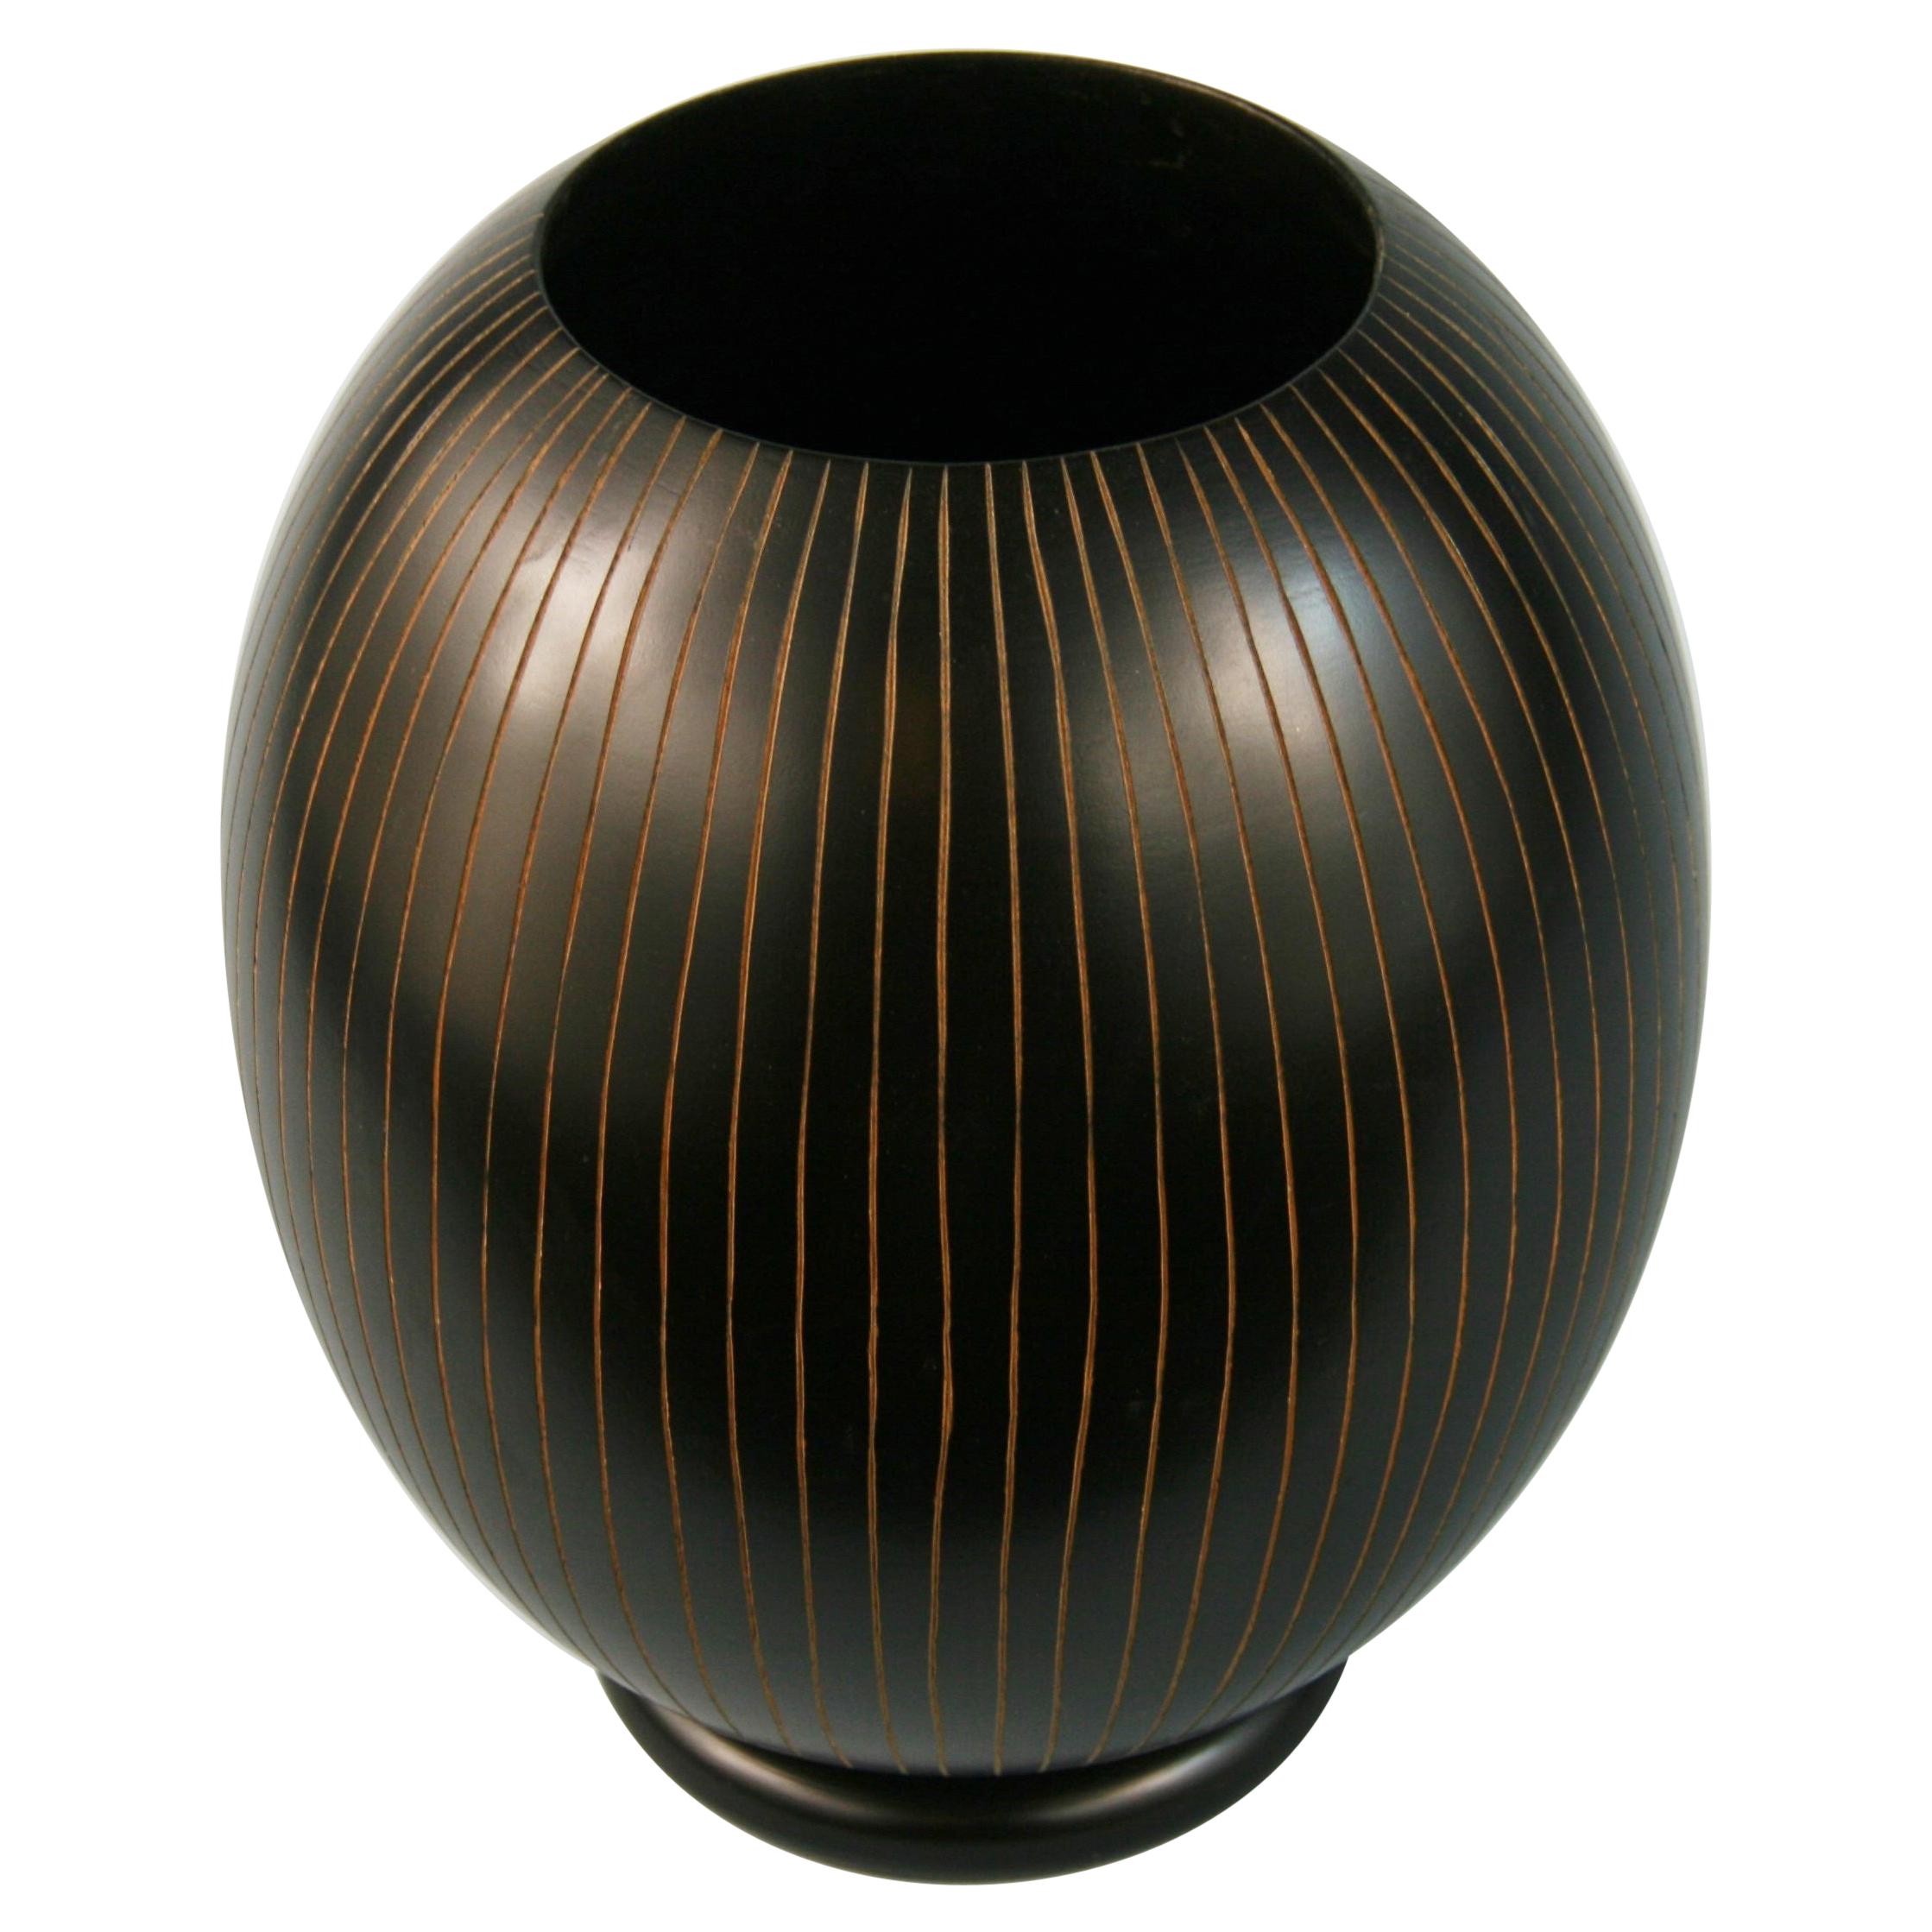 Japanese Hand Turned Wood Vase with Concentric Groves